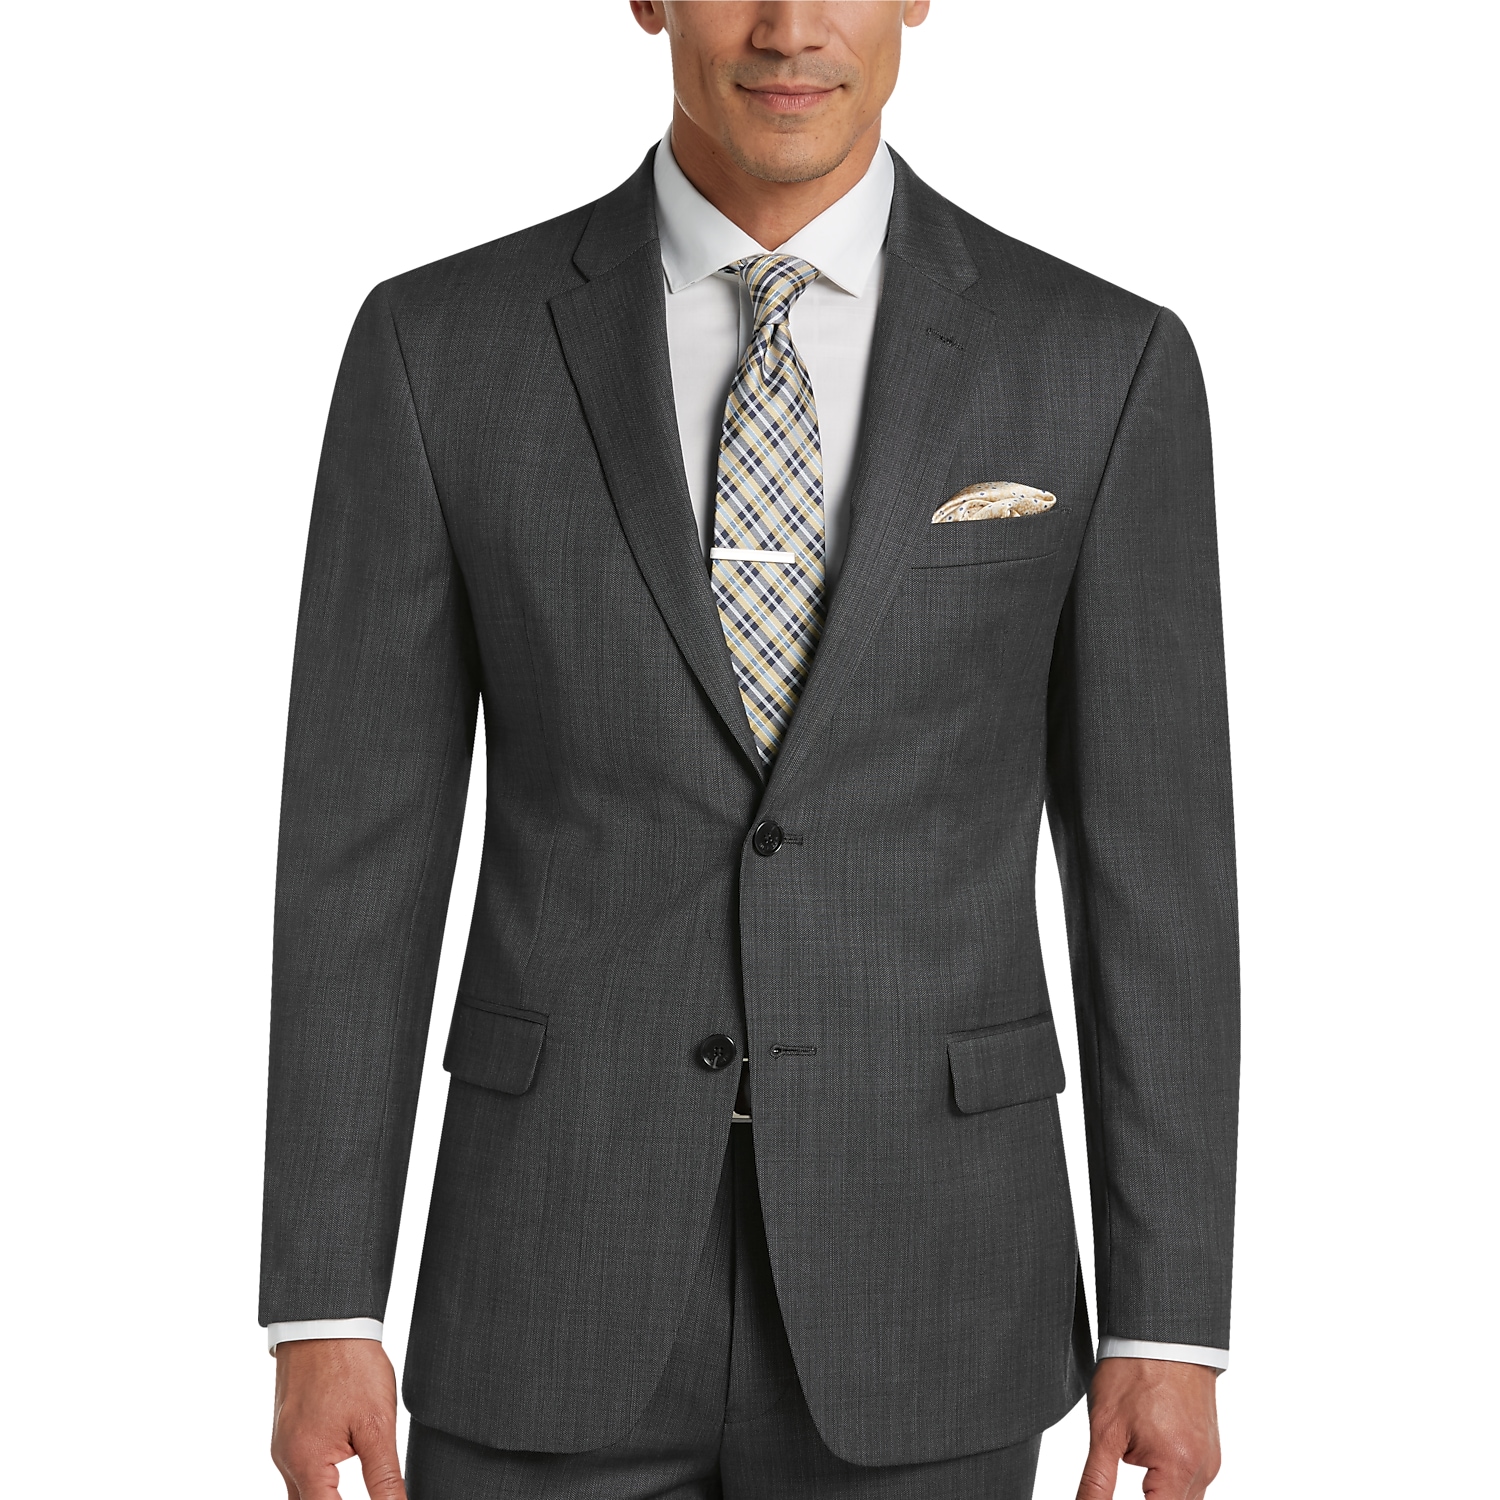 Men's Big & Tall Suits, Designer Business Suits in XL Sizes